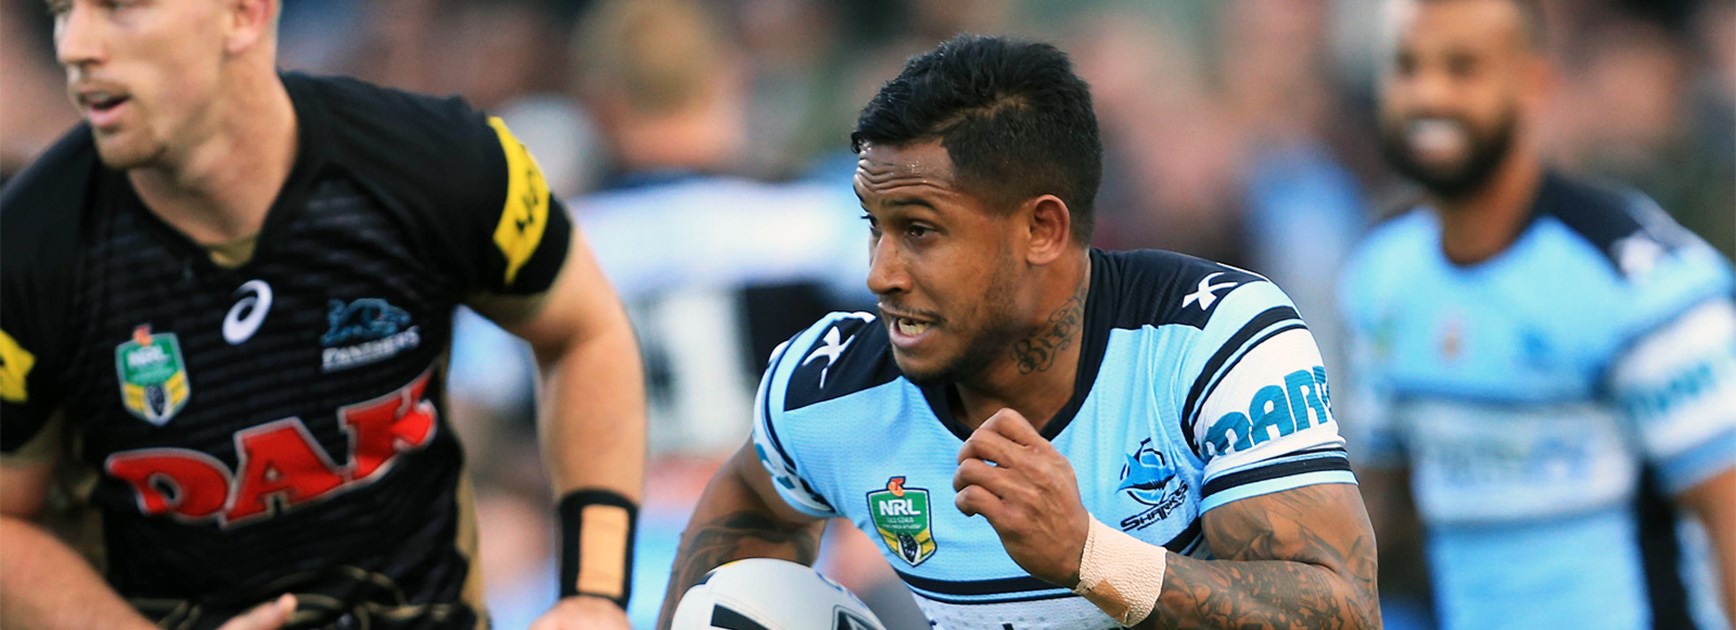 Ben Barba scored two first-half tries against the Panthers on Sunday.